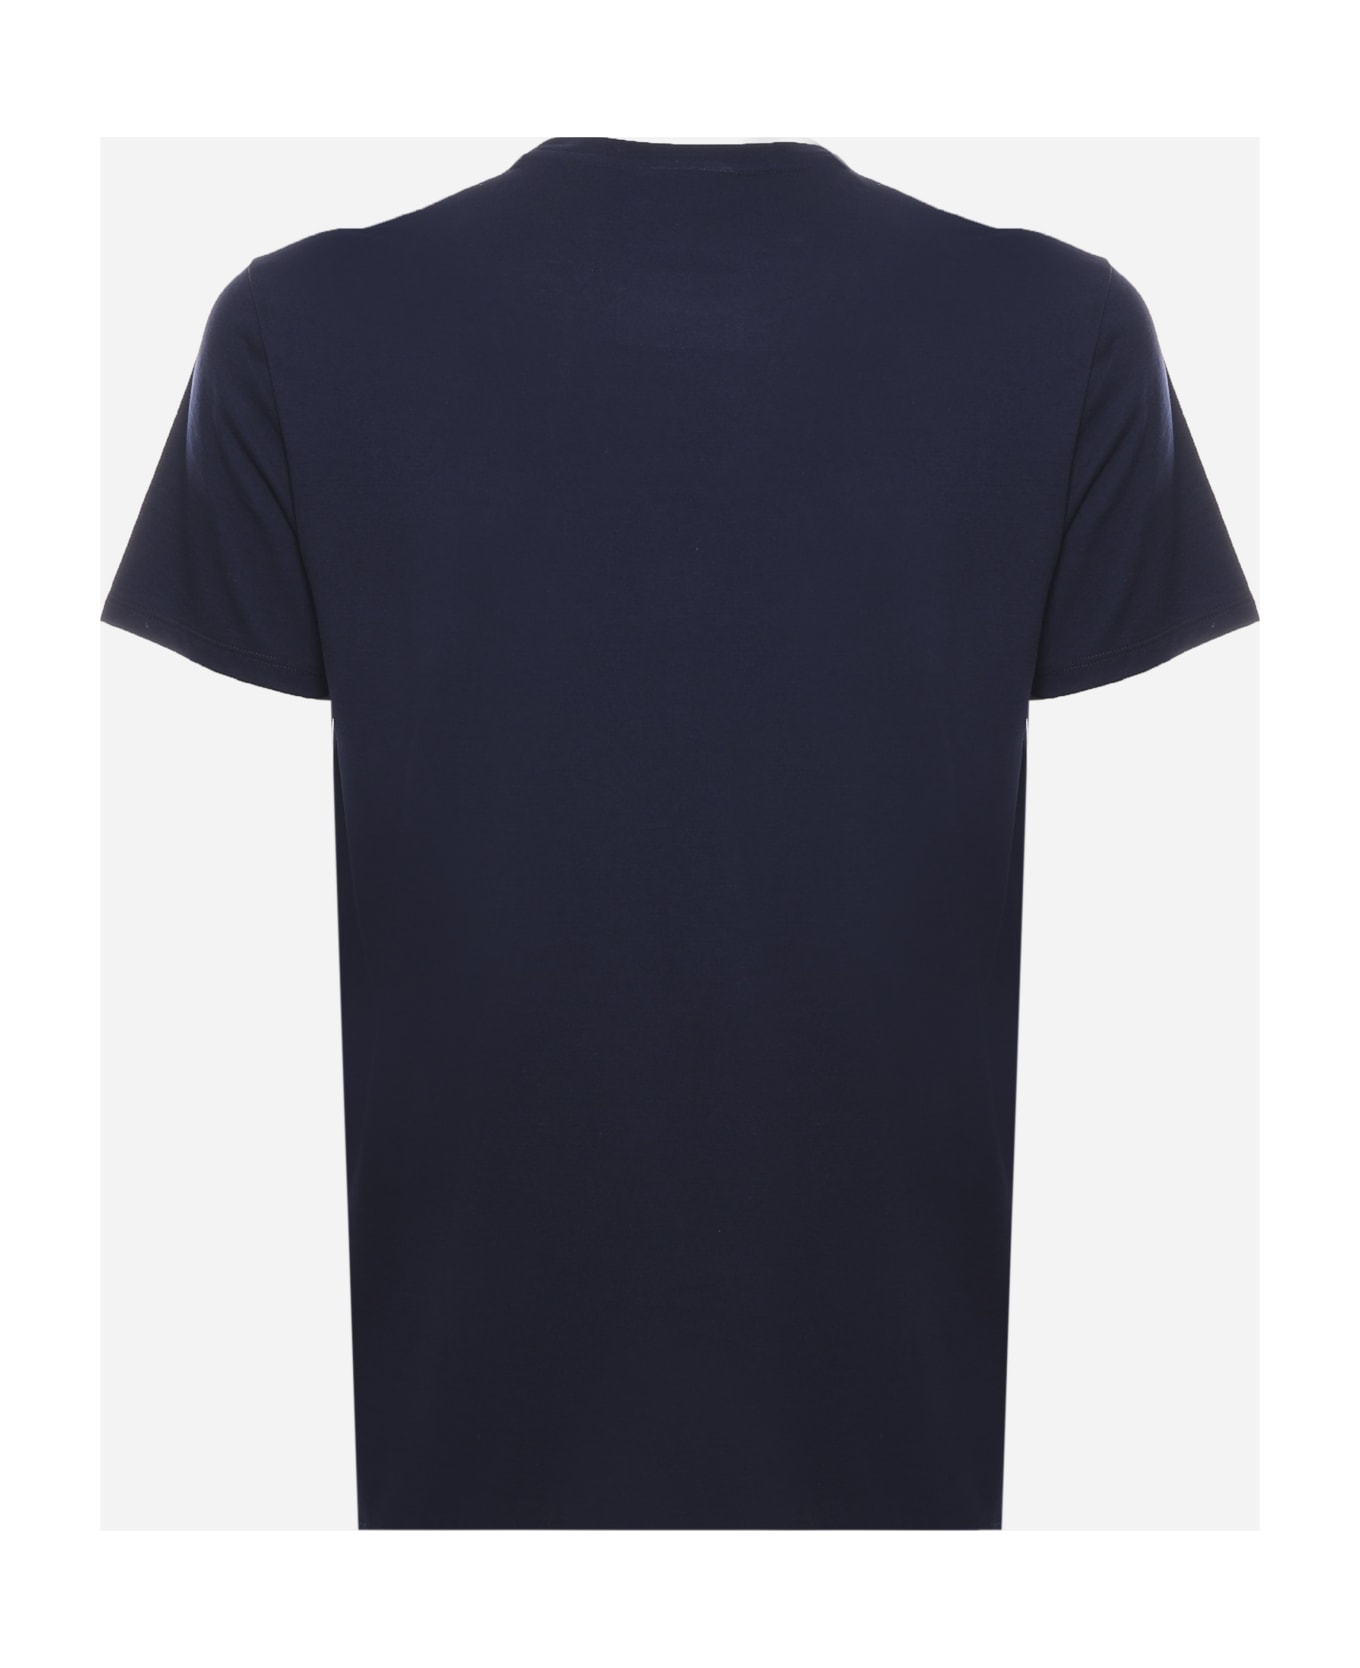 Lacoste Navy Blue T-shirt In Cotton Jersey - Marine